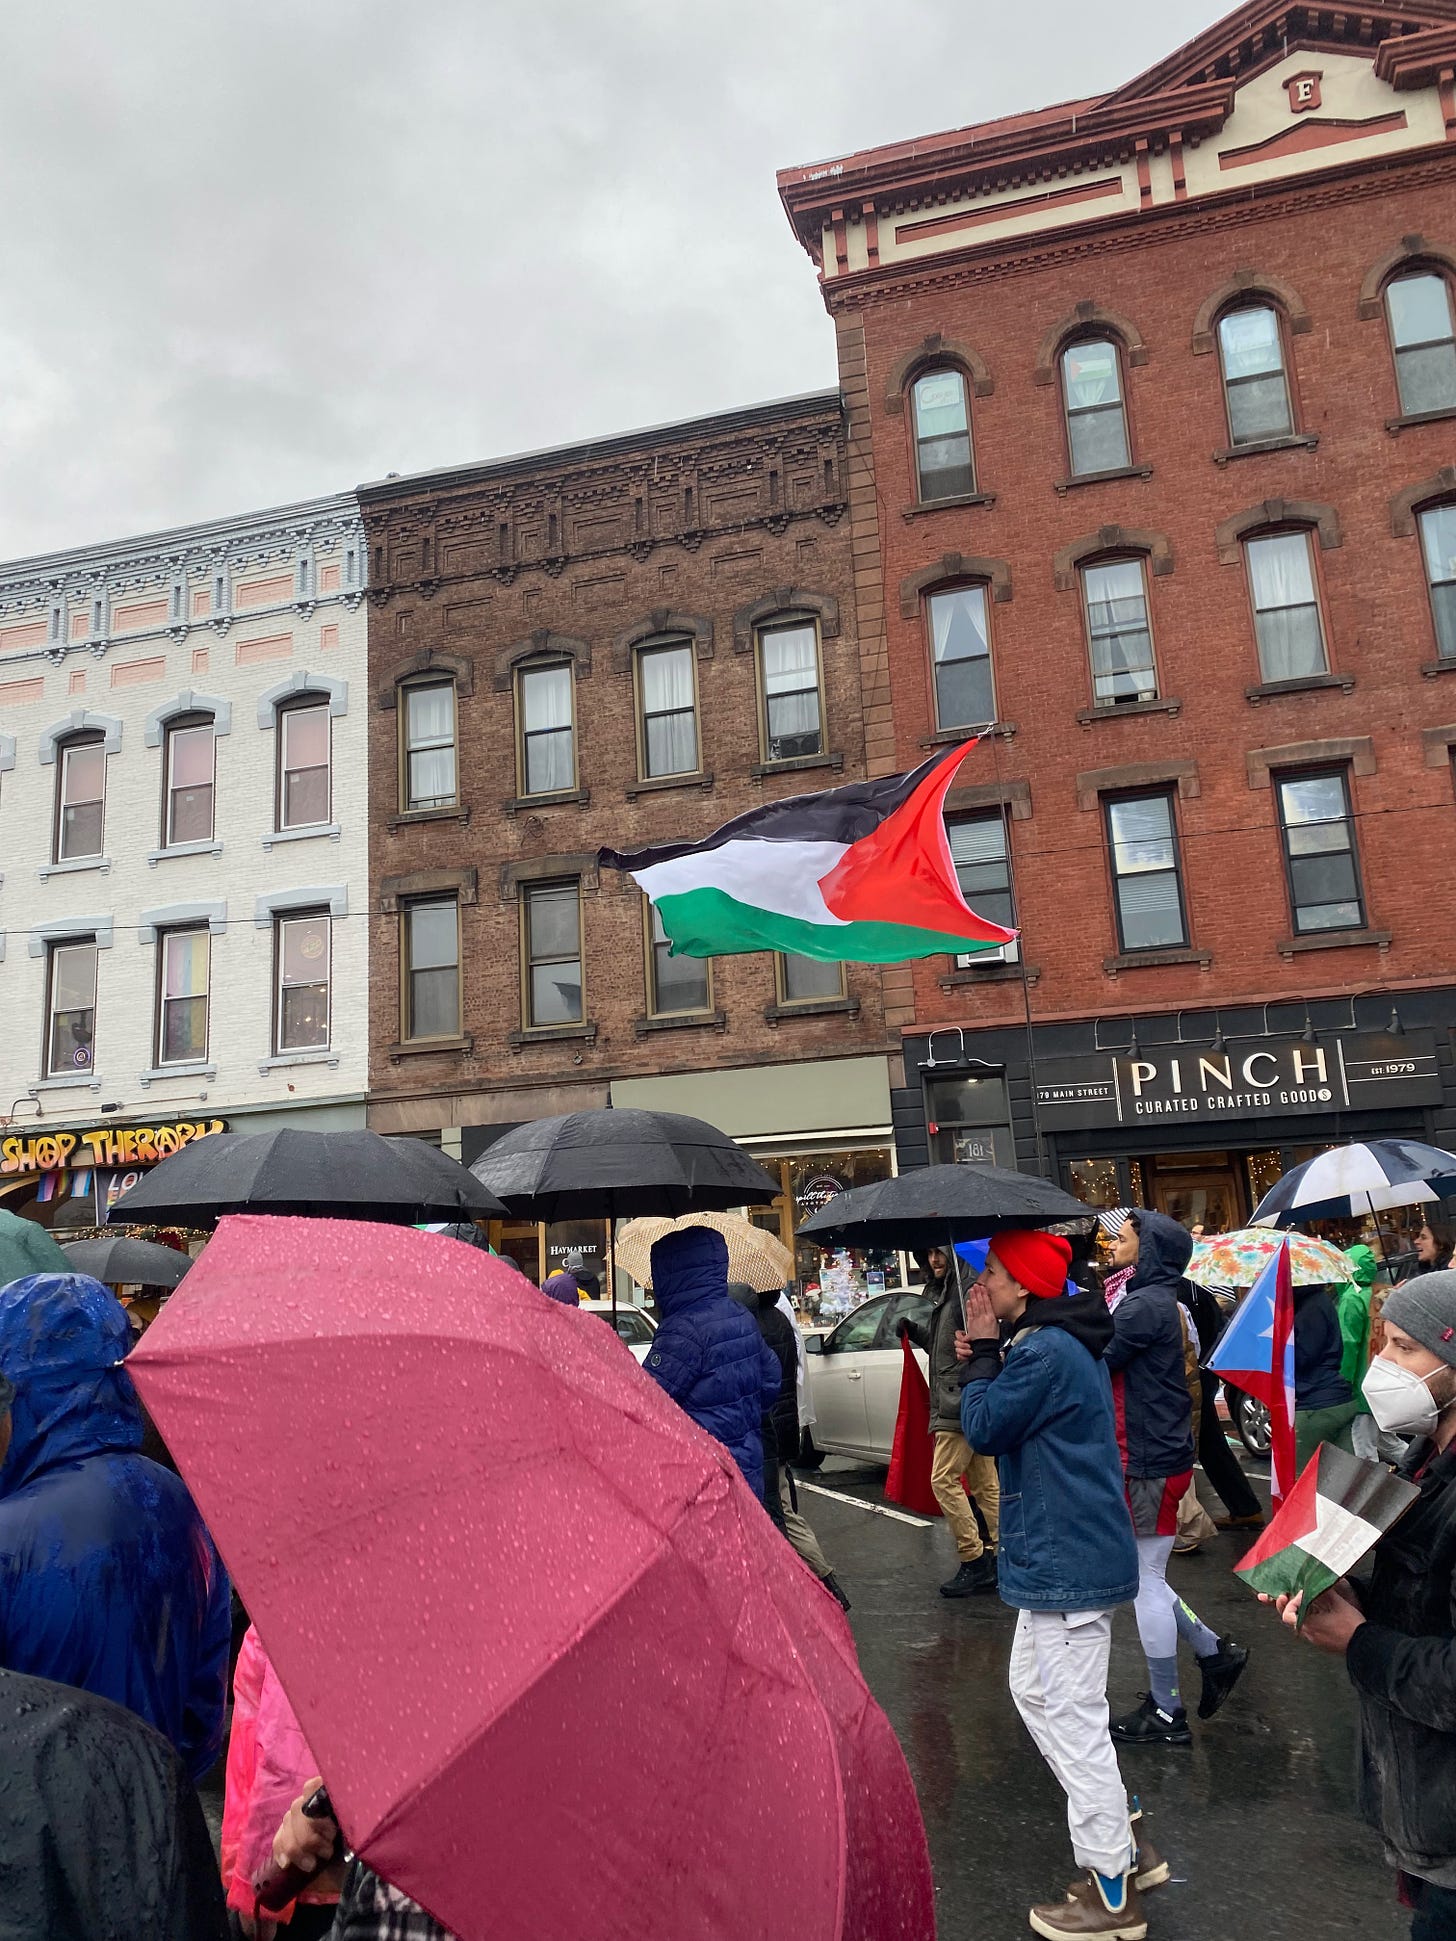 A group of people holding umbrellas march along a main street lined with brick buildings. Someone is waving a Palestinian flag.